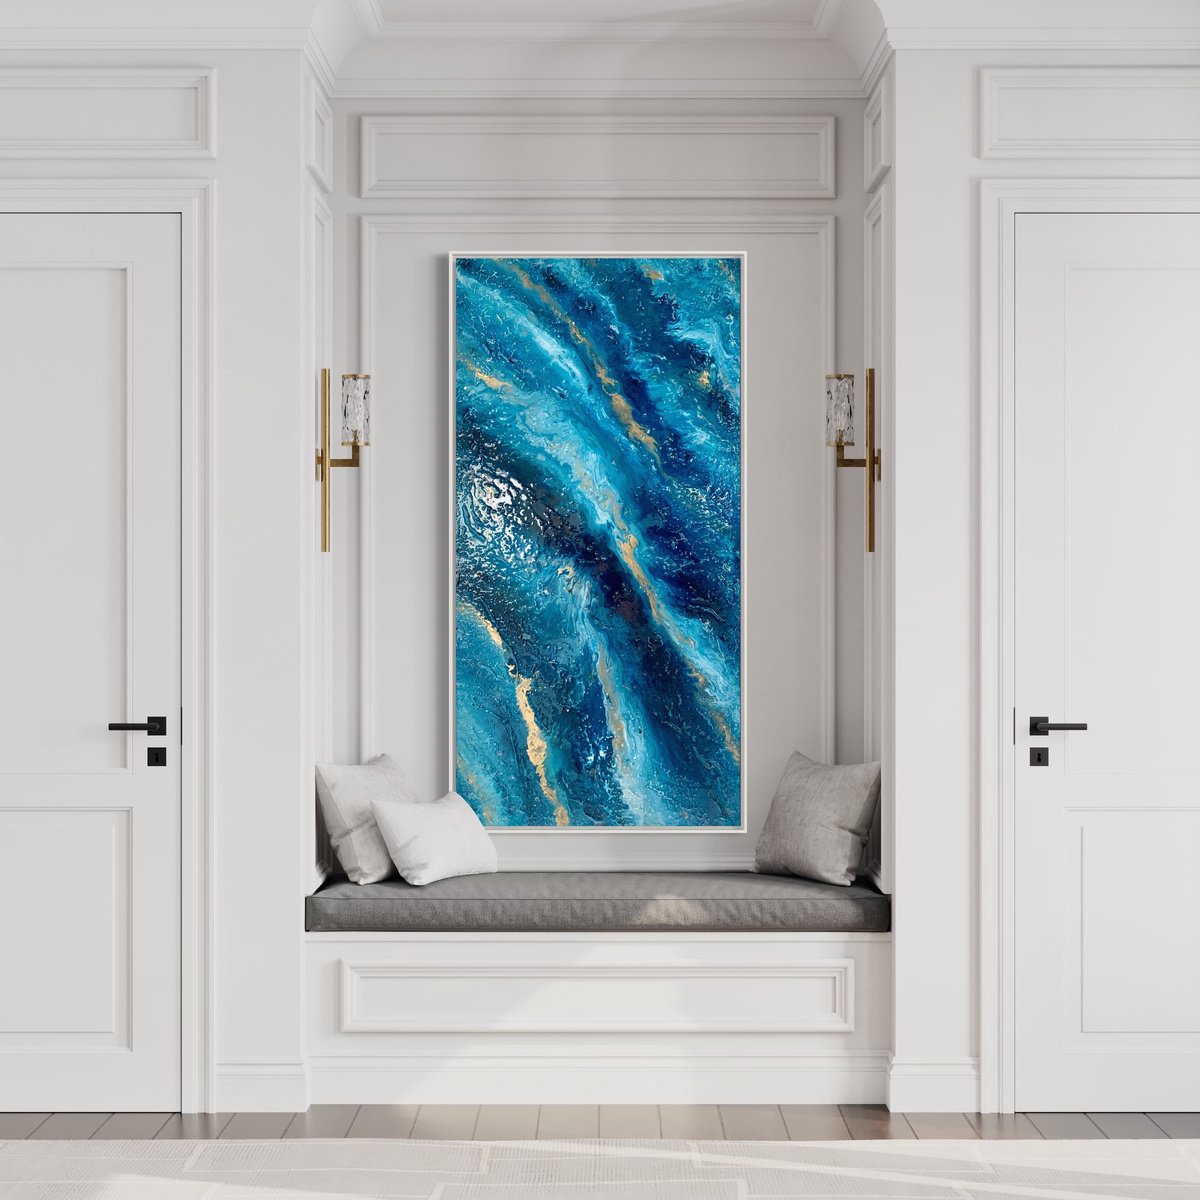 The Deep 50 x 100cm textured abstract by Sarah Berger